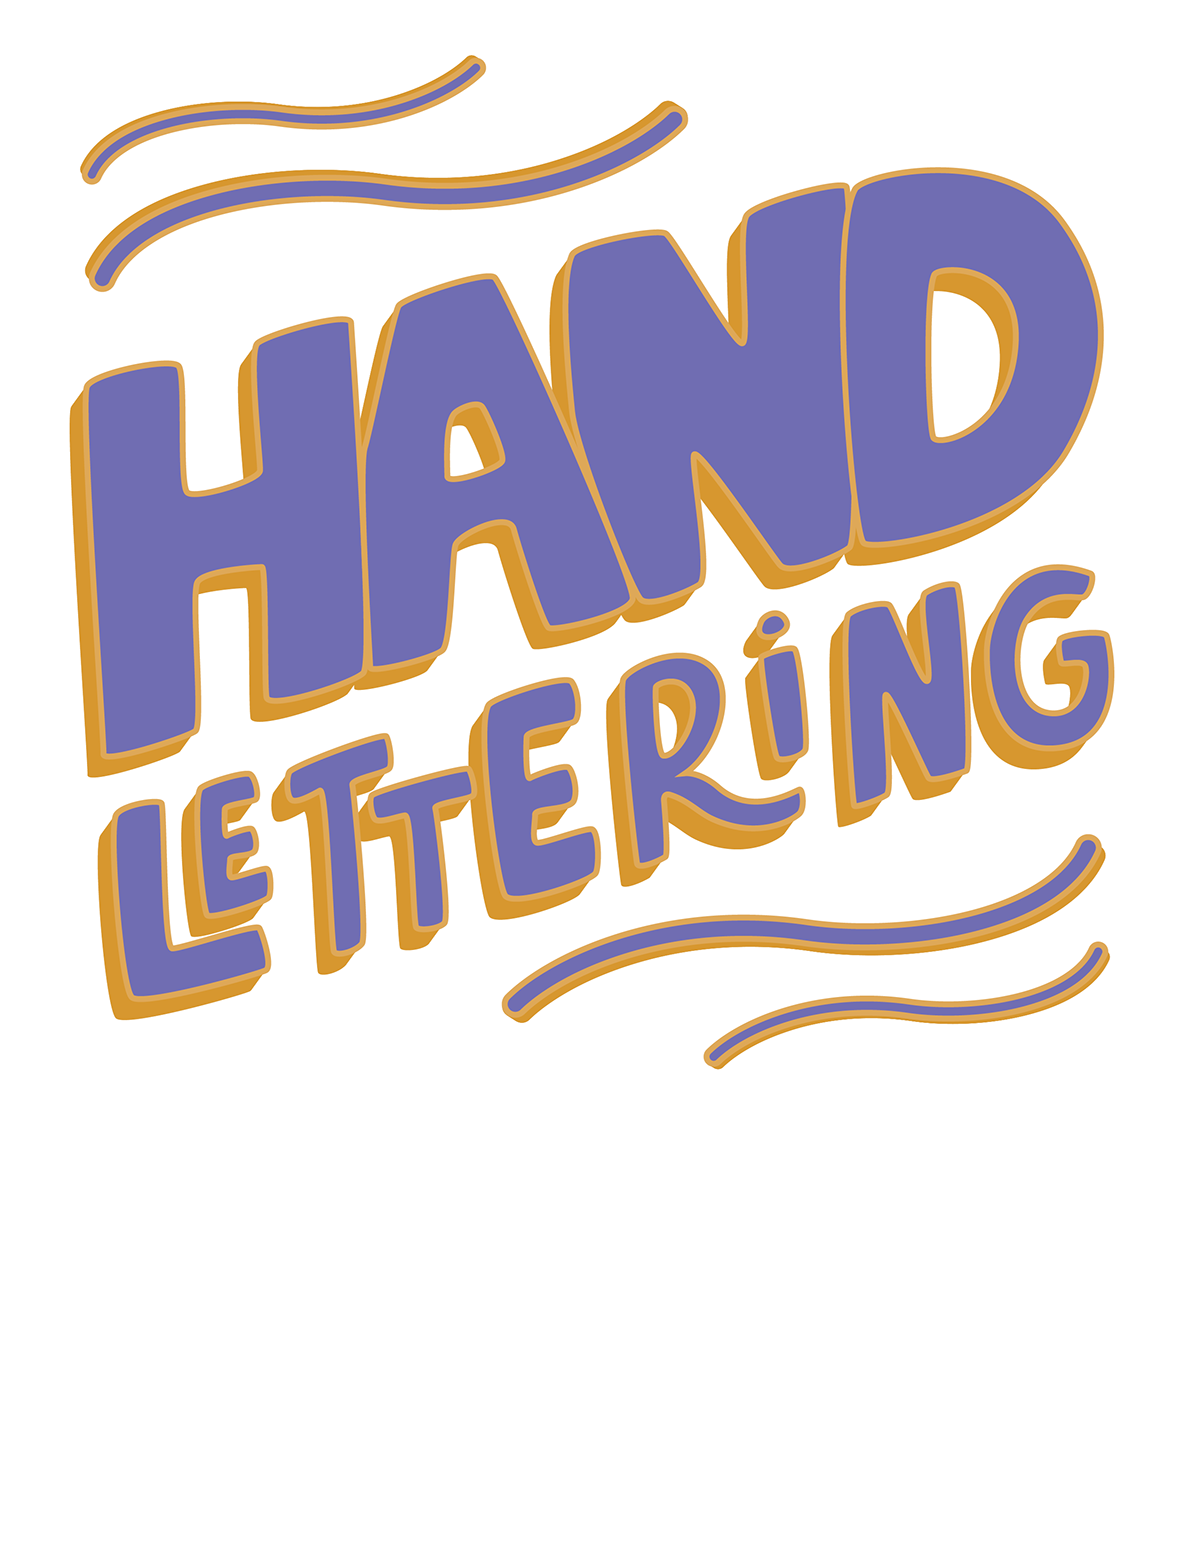 HAND LETTERING typography   sketching